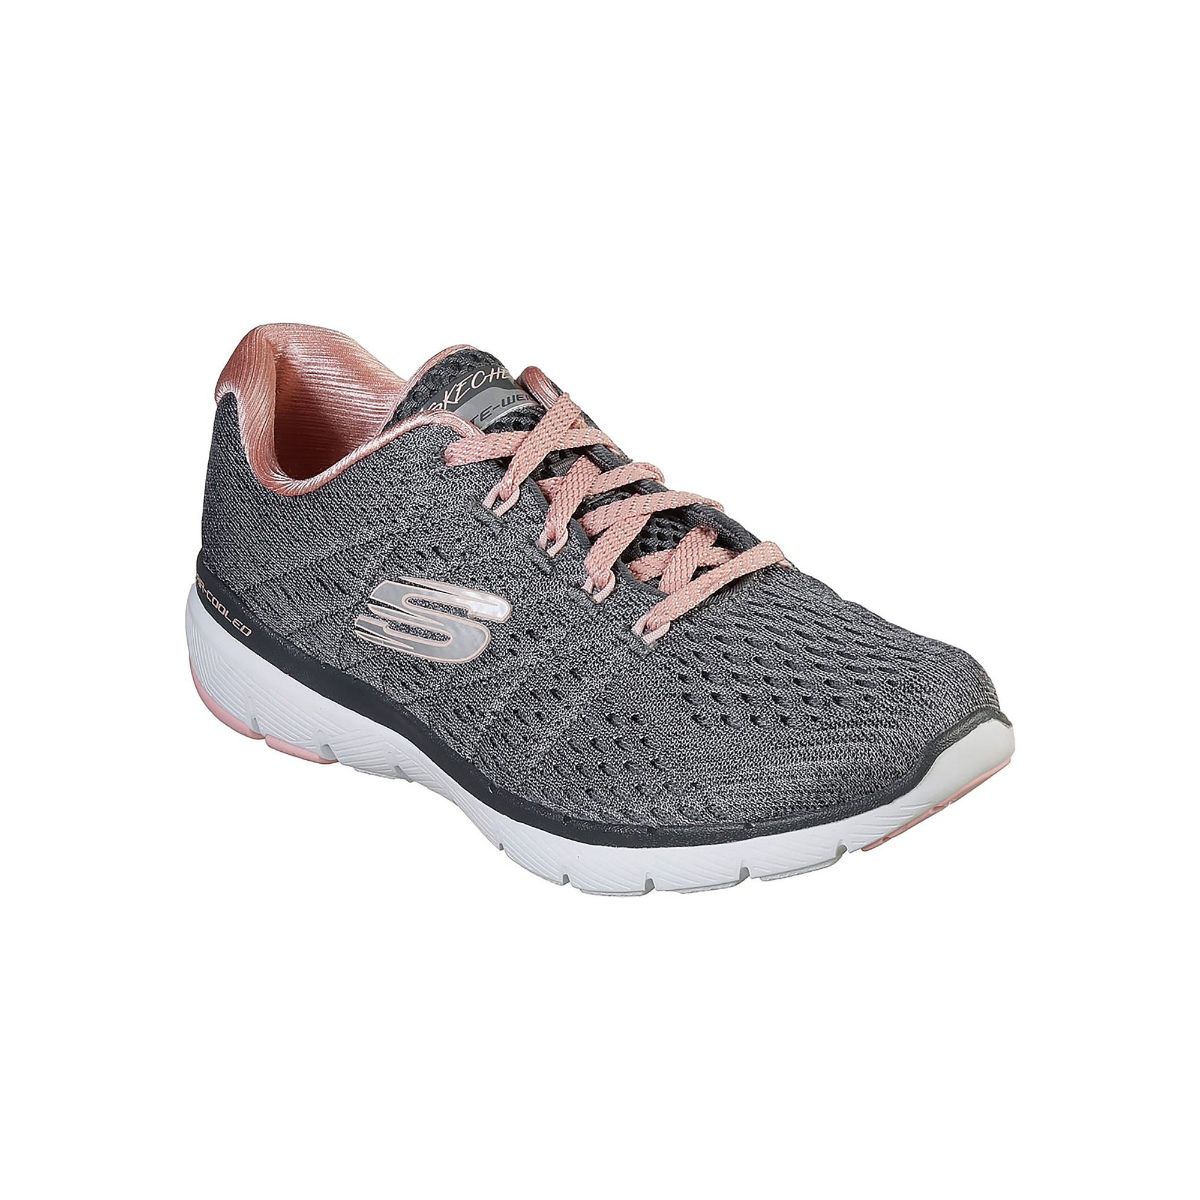 Grey Flex Appeal 3.0 Satellite Casual Shoes: Buy SKECHERS Grey Flex 3.0 Satellite Shoes Online Best Price in India | Nykaa